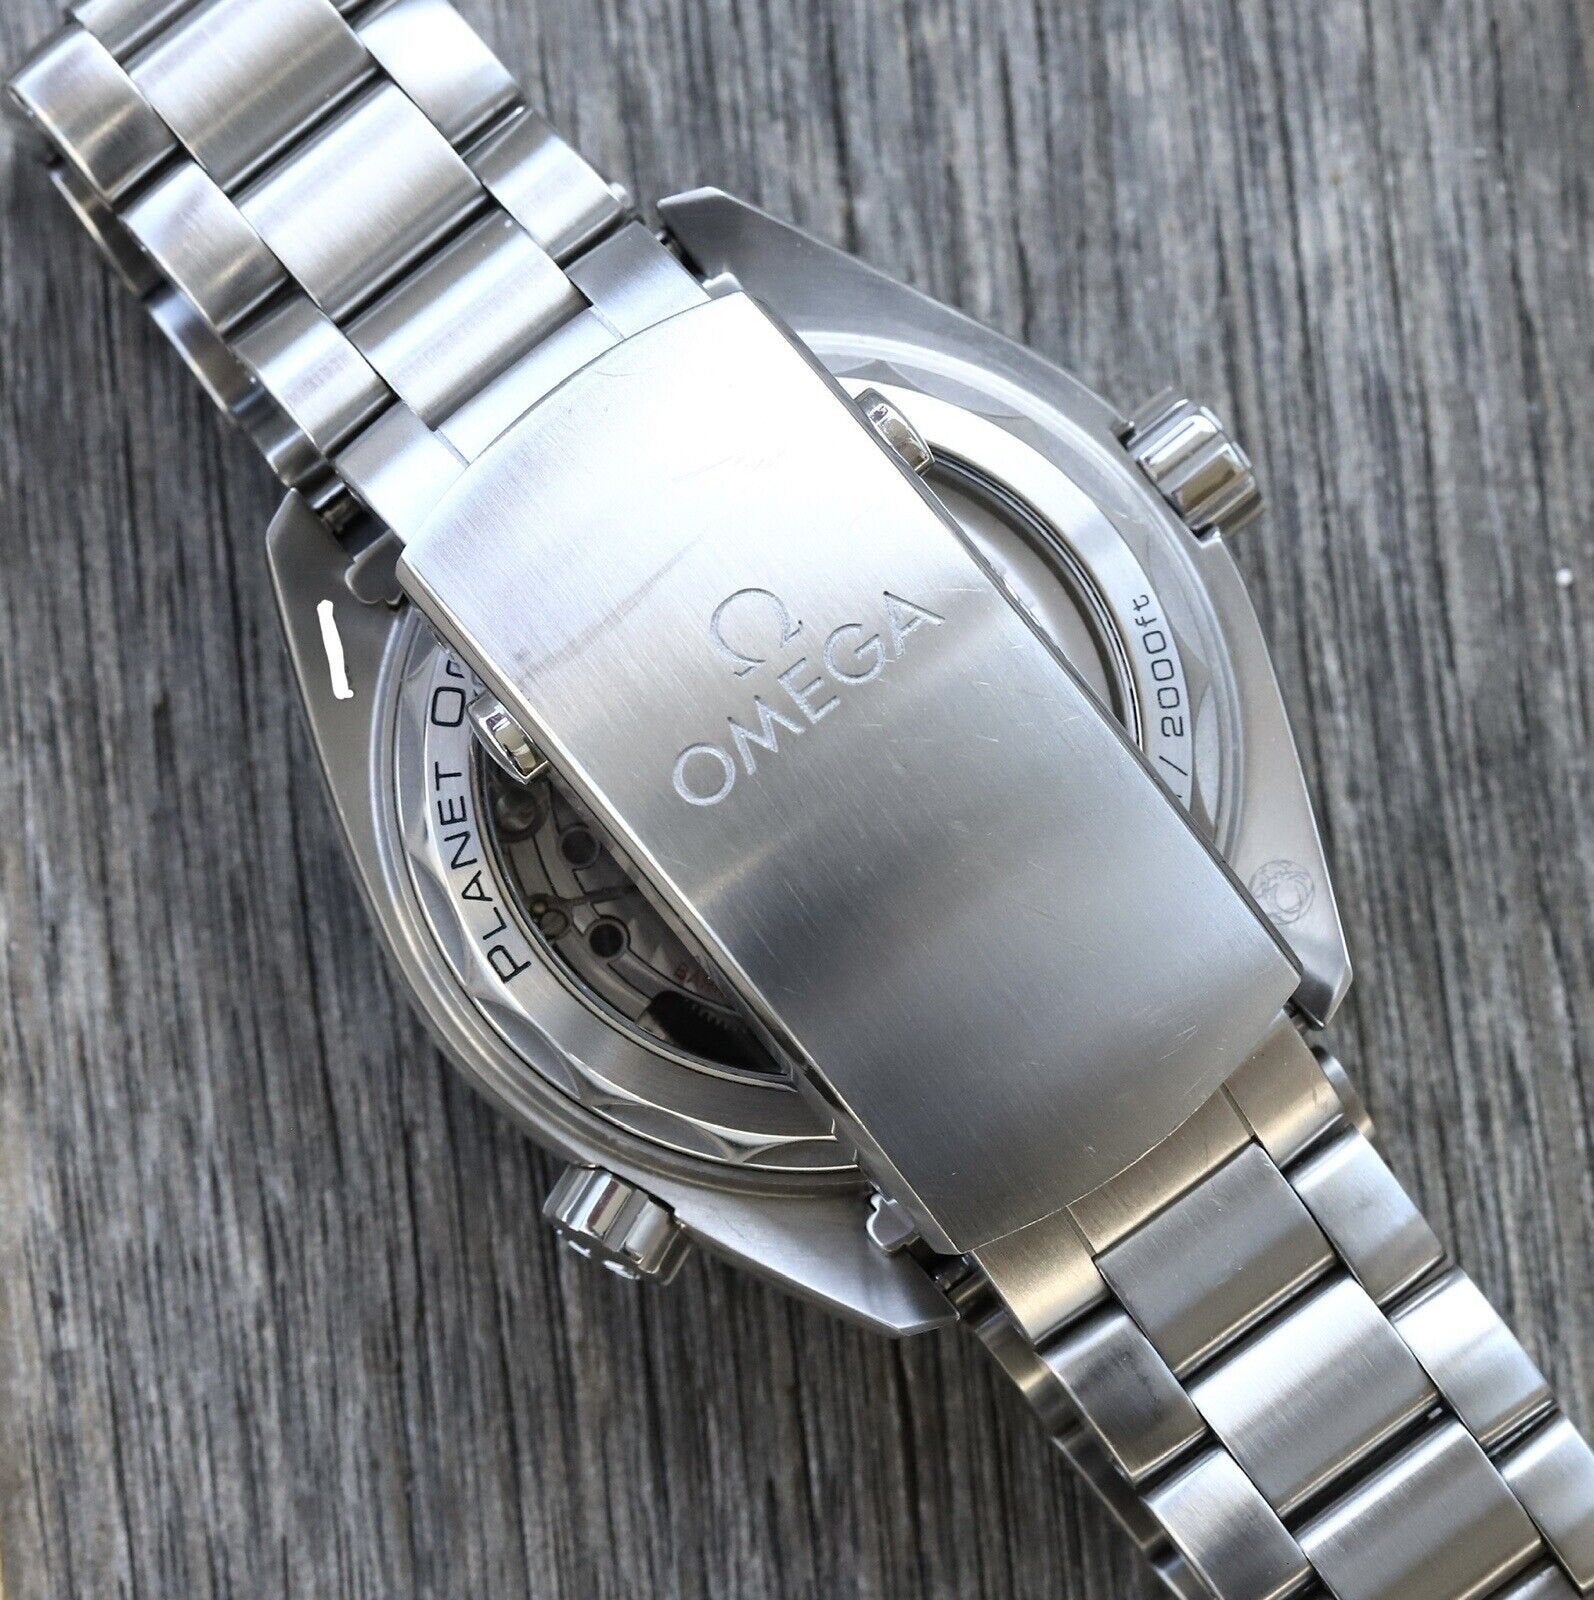 Omega seamaster 22mm bracelet band steel 1591 953 62 planet ocean for  Rs.45,256 for sale from a Trusted Seller on Chrono24